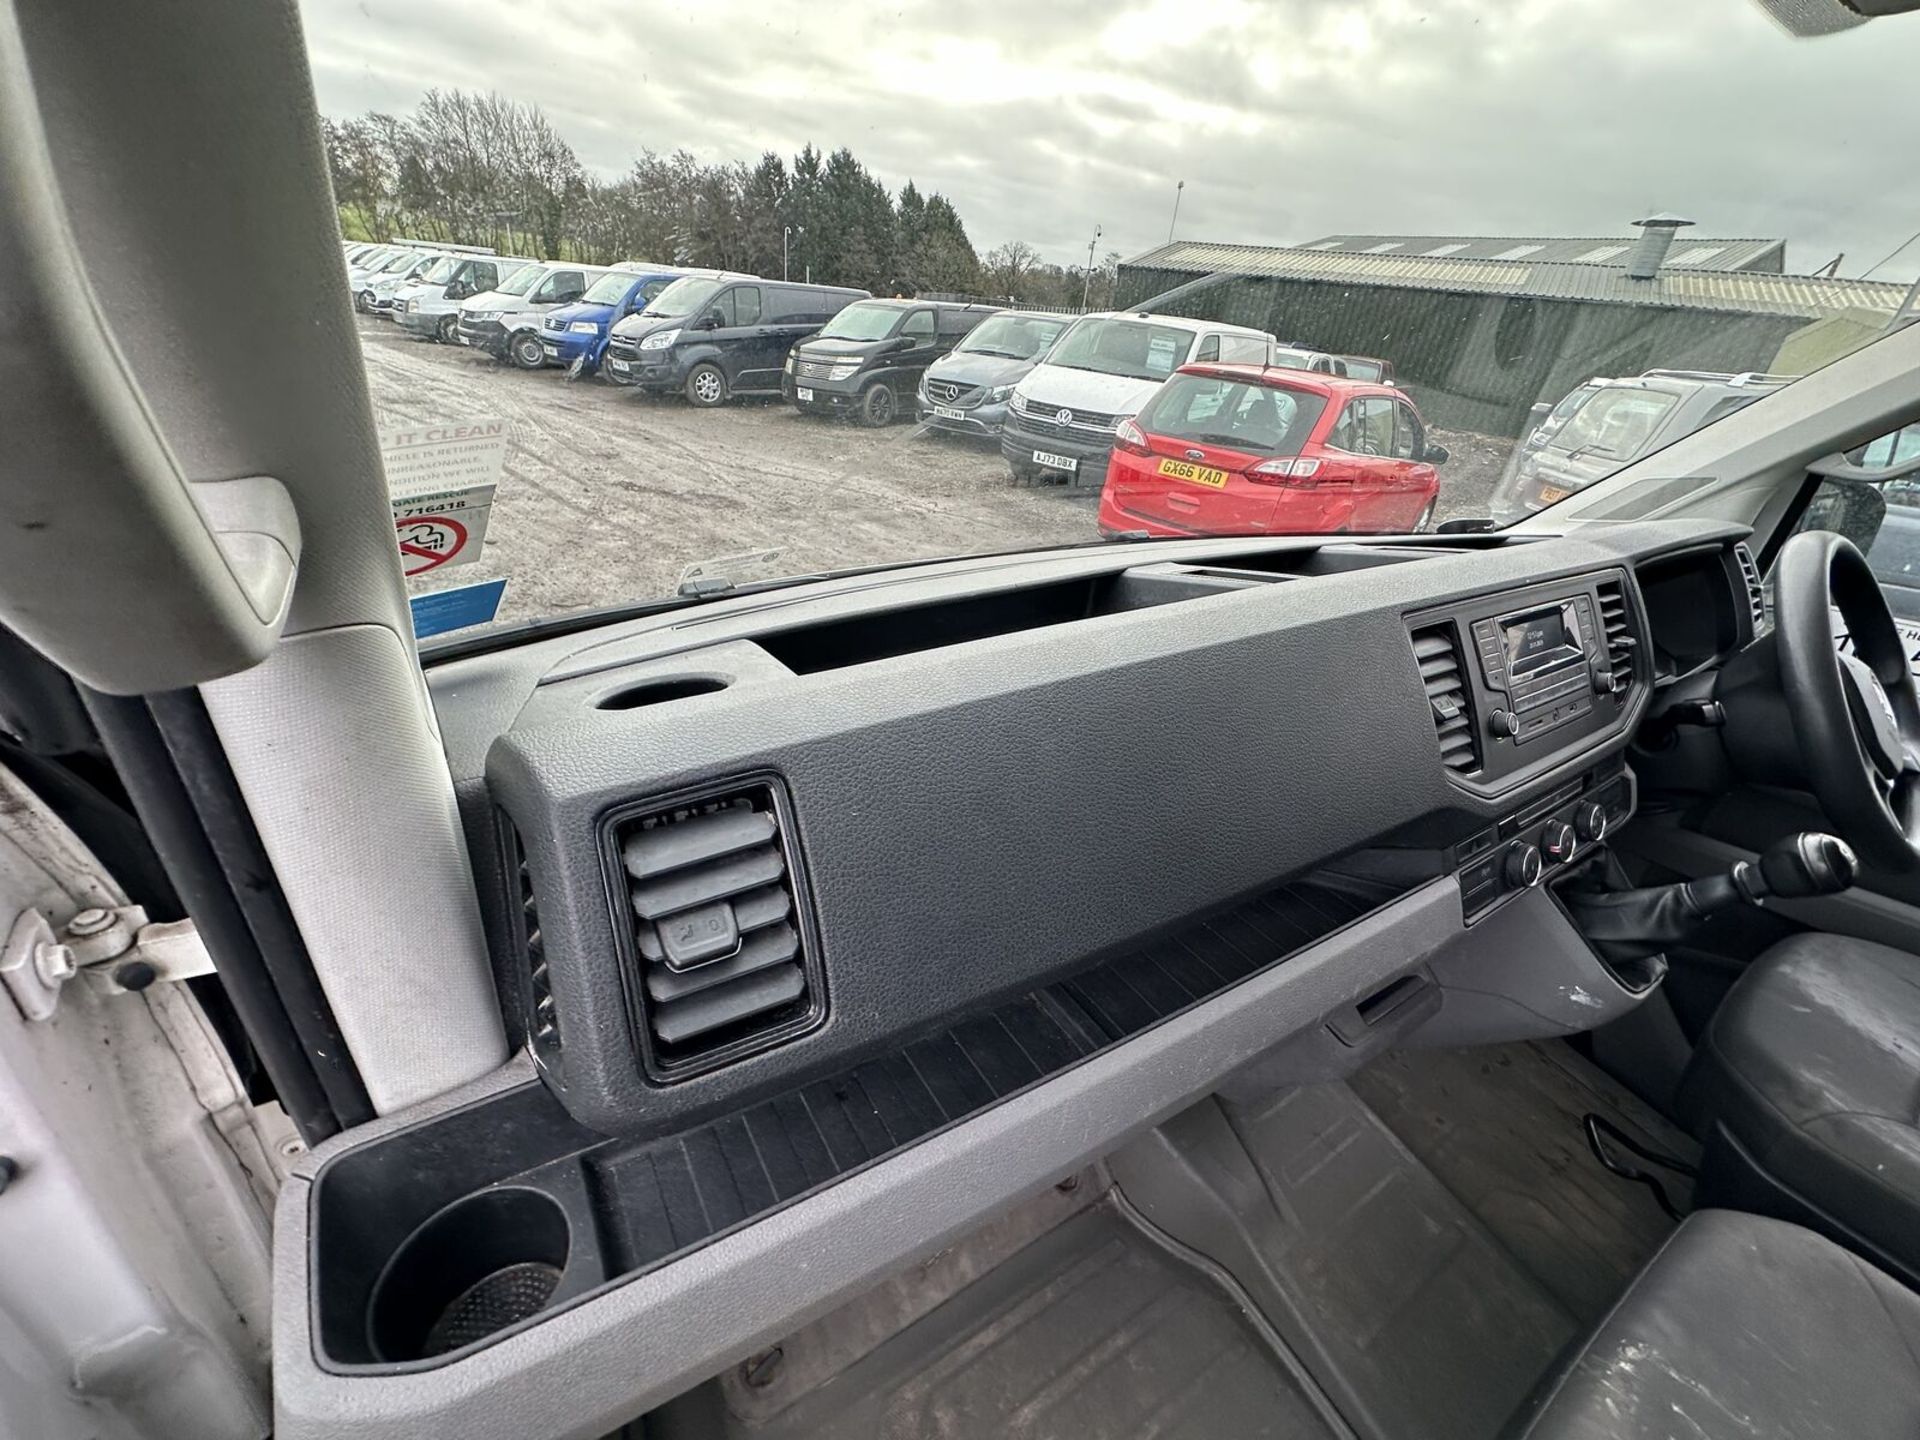 DEPENDABLE DRIVE: 2018 VW CRAFTER CR35 LWB 2.0 TDI FWD - Image 7 of 16